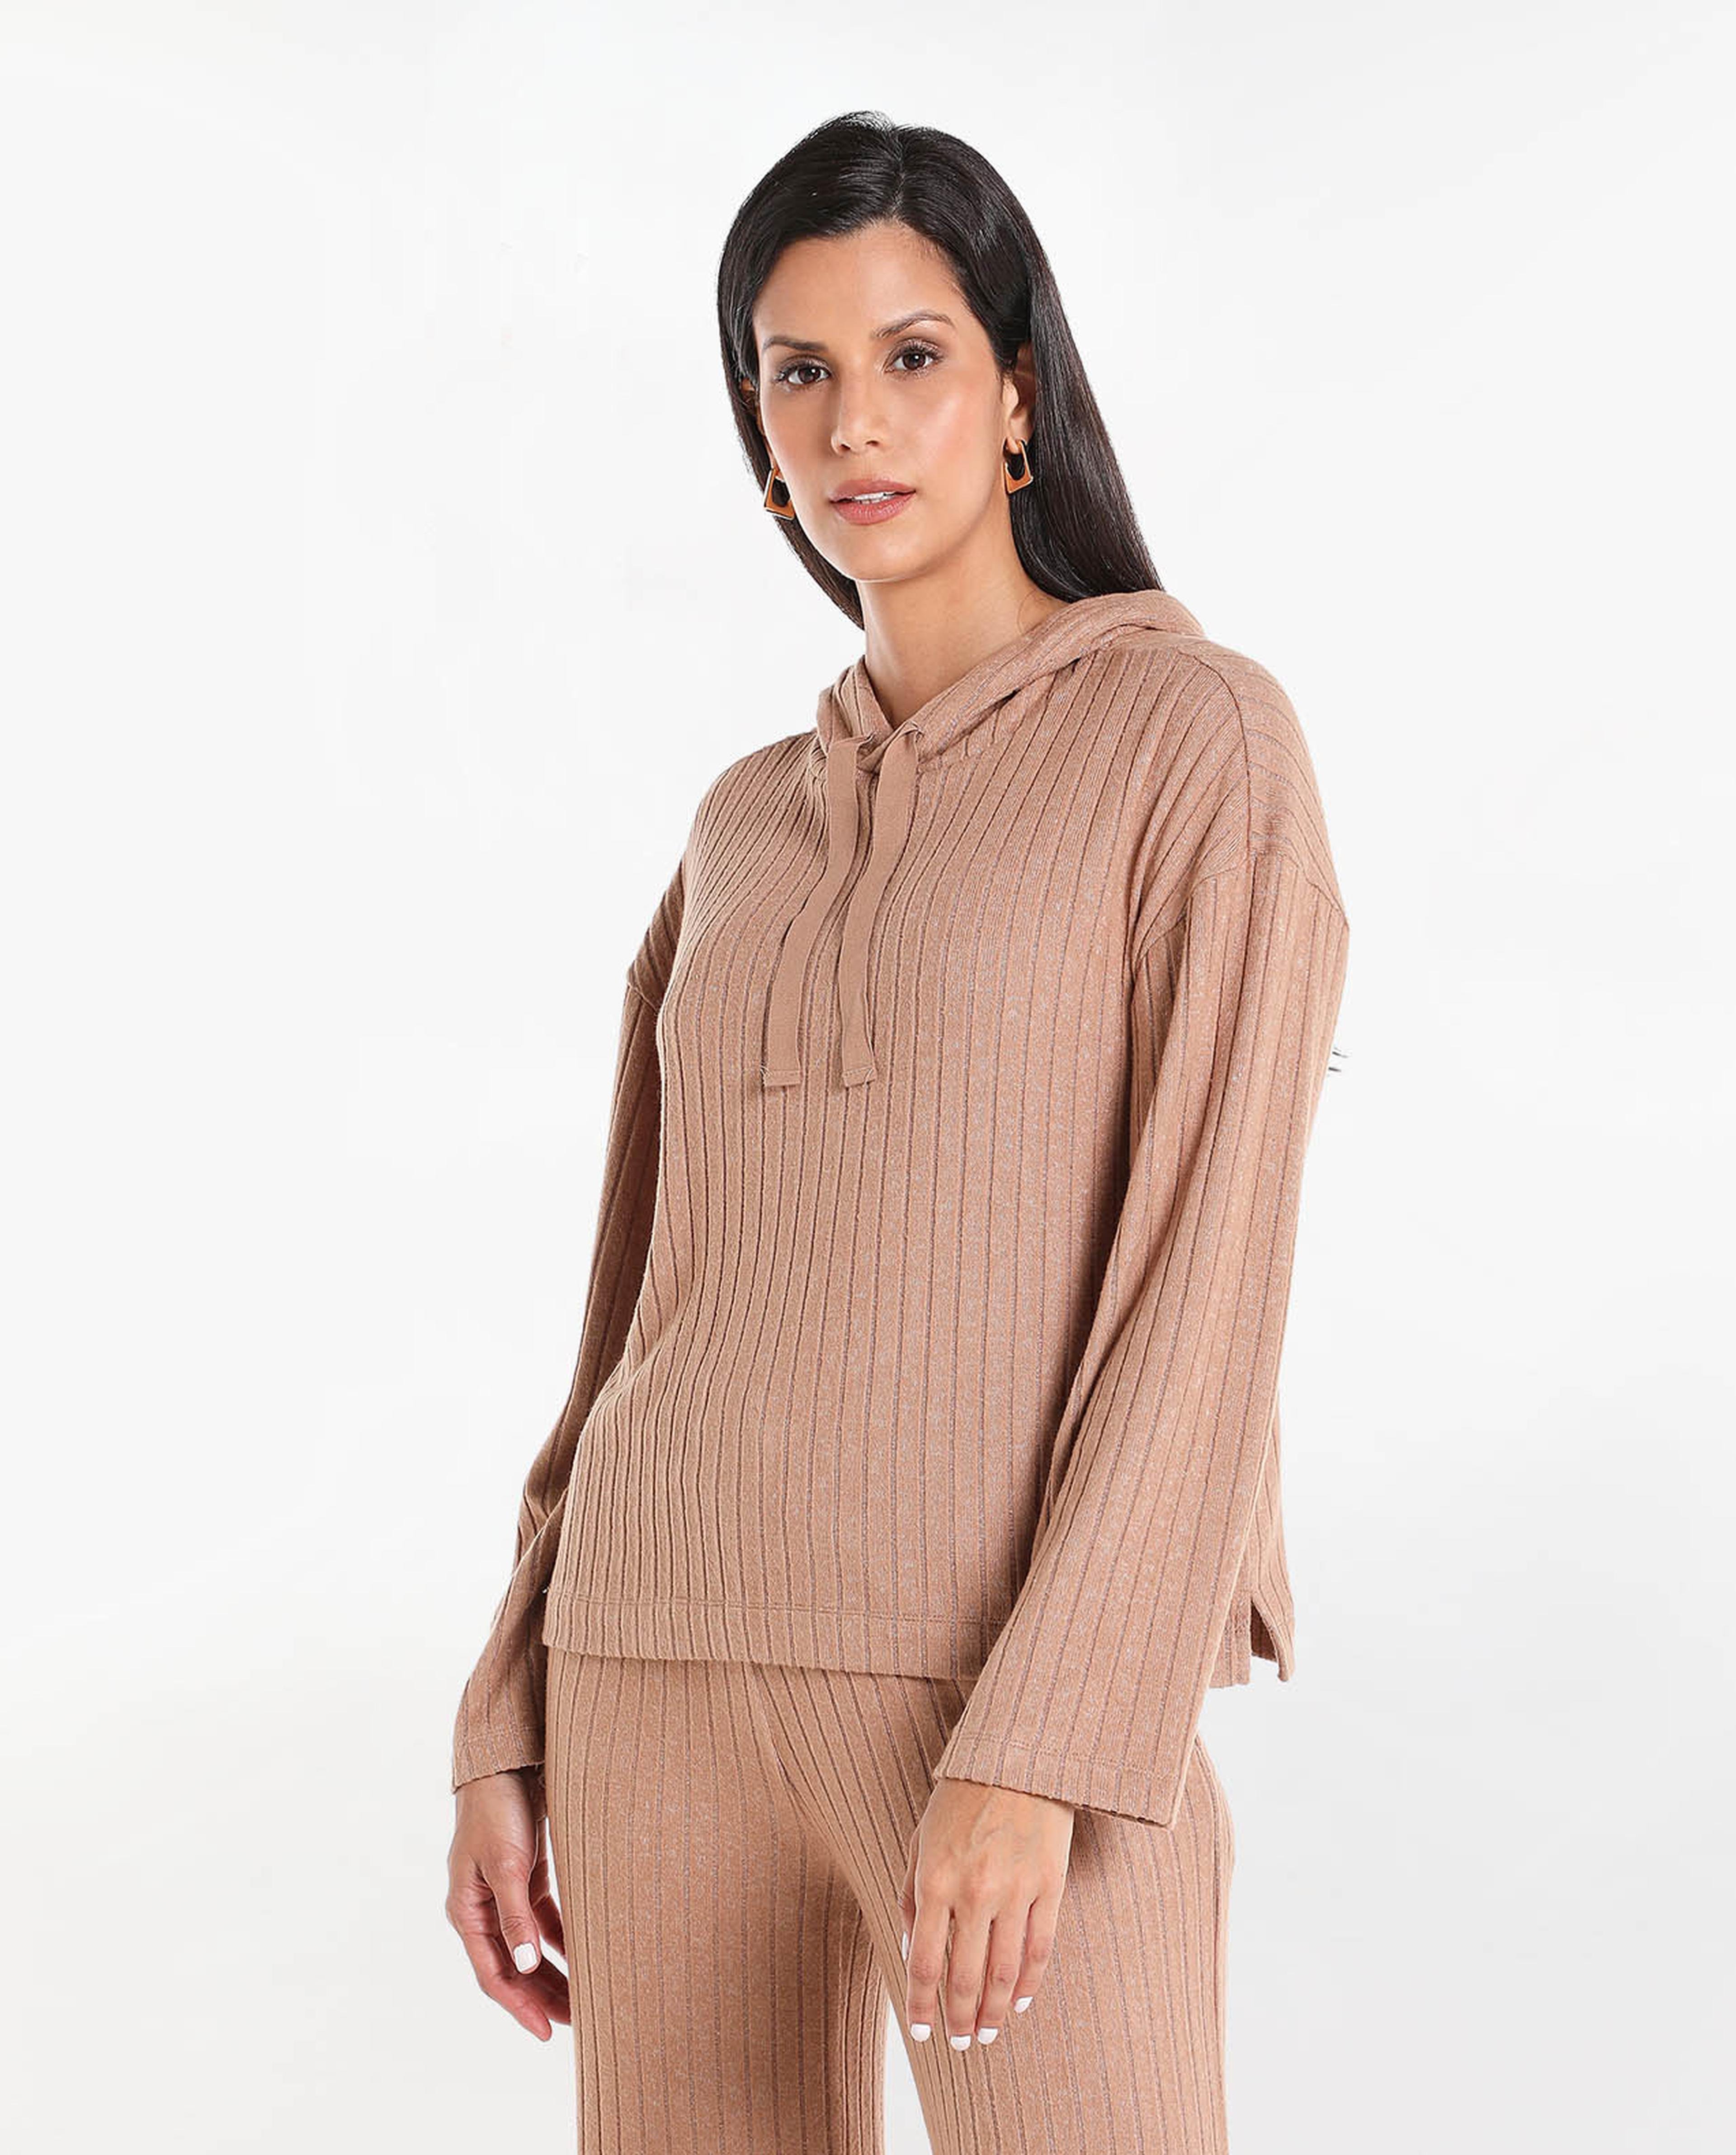 Solid Ribbed Sleepwear Shirt with Long Sleeves